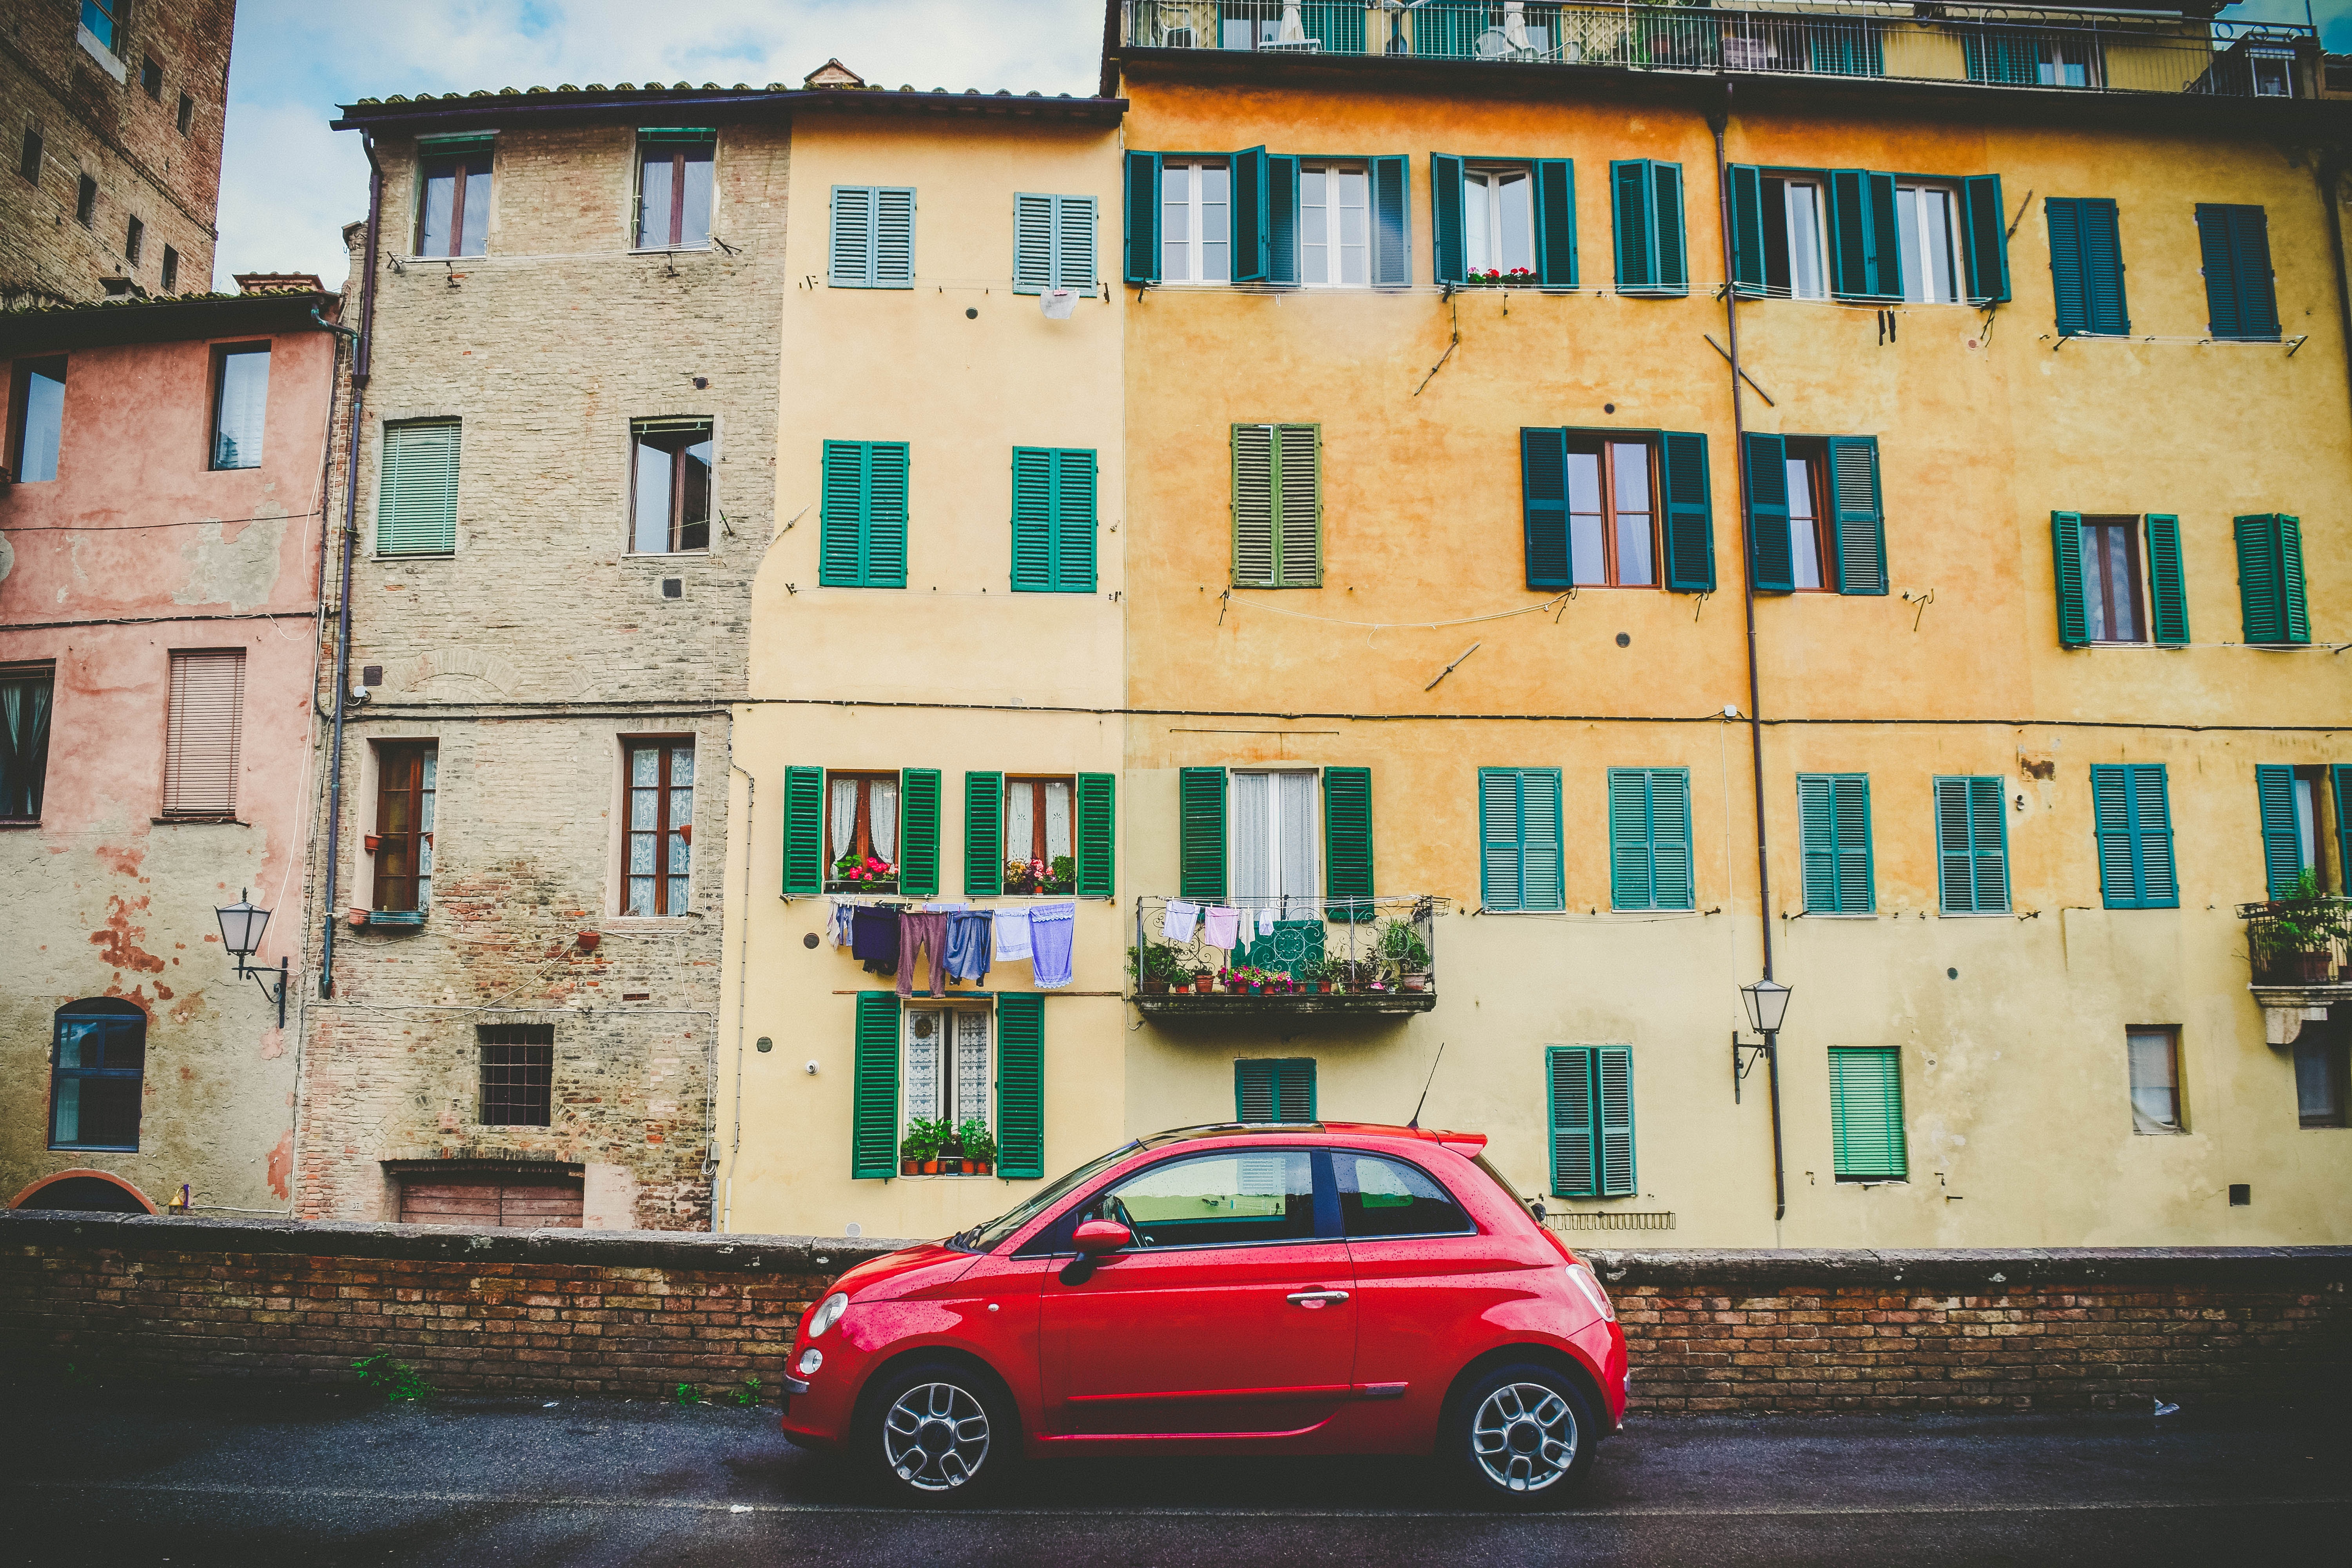 Tips for driving in Italy